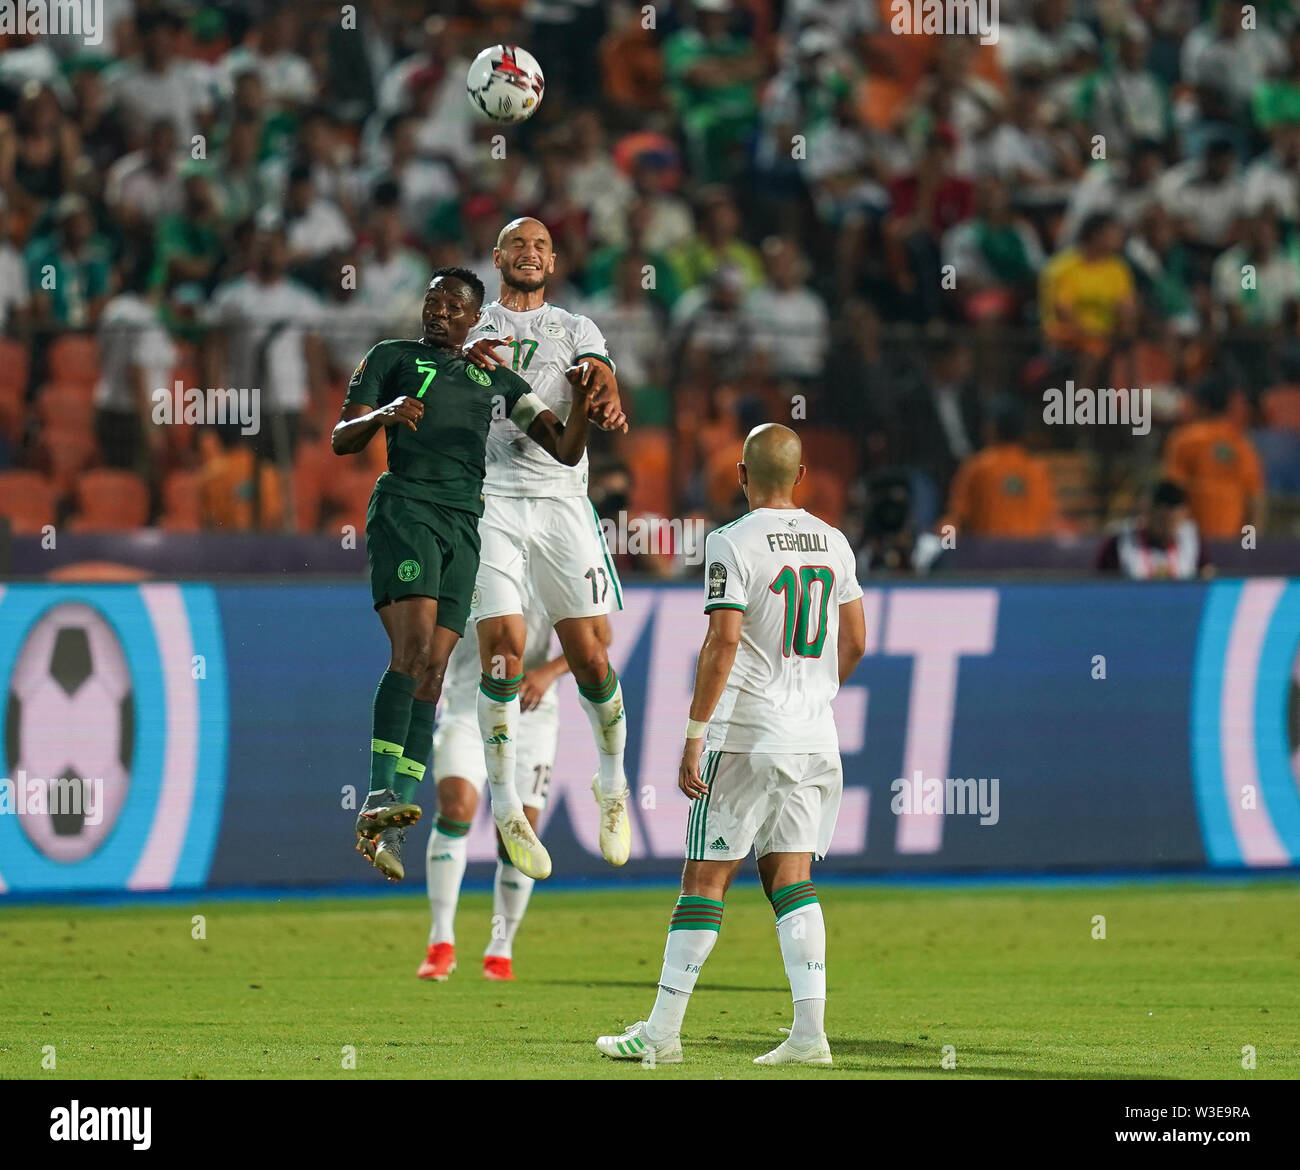 Cairo, Algeria, Egypt. 14th July, 2019. FRANCE OUT July 14, 2019: Ahmed Musa of Nigeria and Adlane Guedioura of Algeria challenging for the ball during the 2019 African Cup of Nations match between Algeria and Nigeria at the Cairo International Stadium in Cairo, Egypt. Ulrik Pedersen/CSM/Alamy Live News Stock Photo